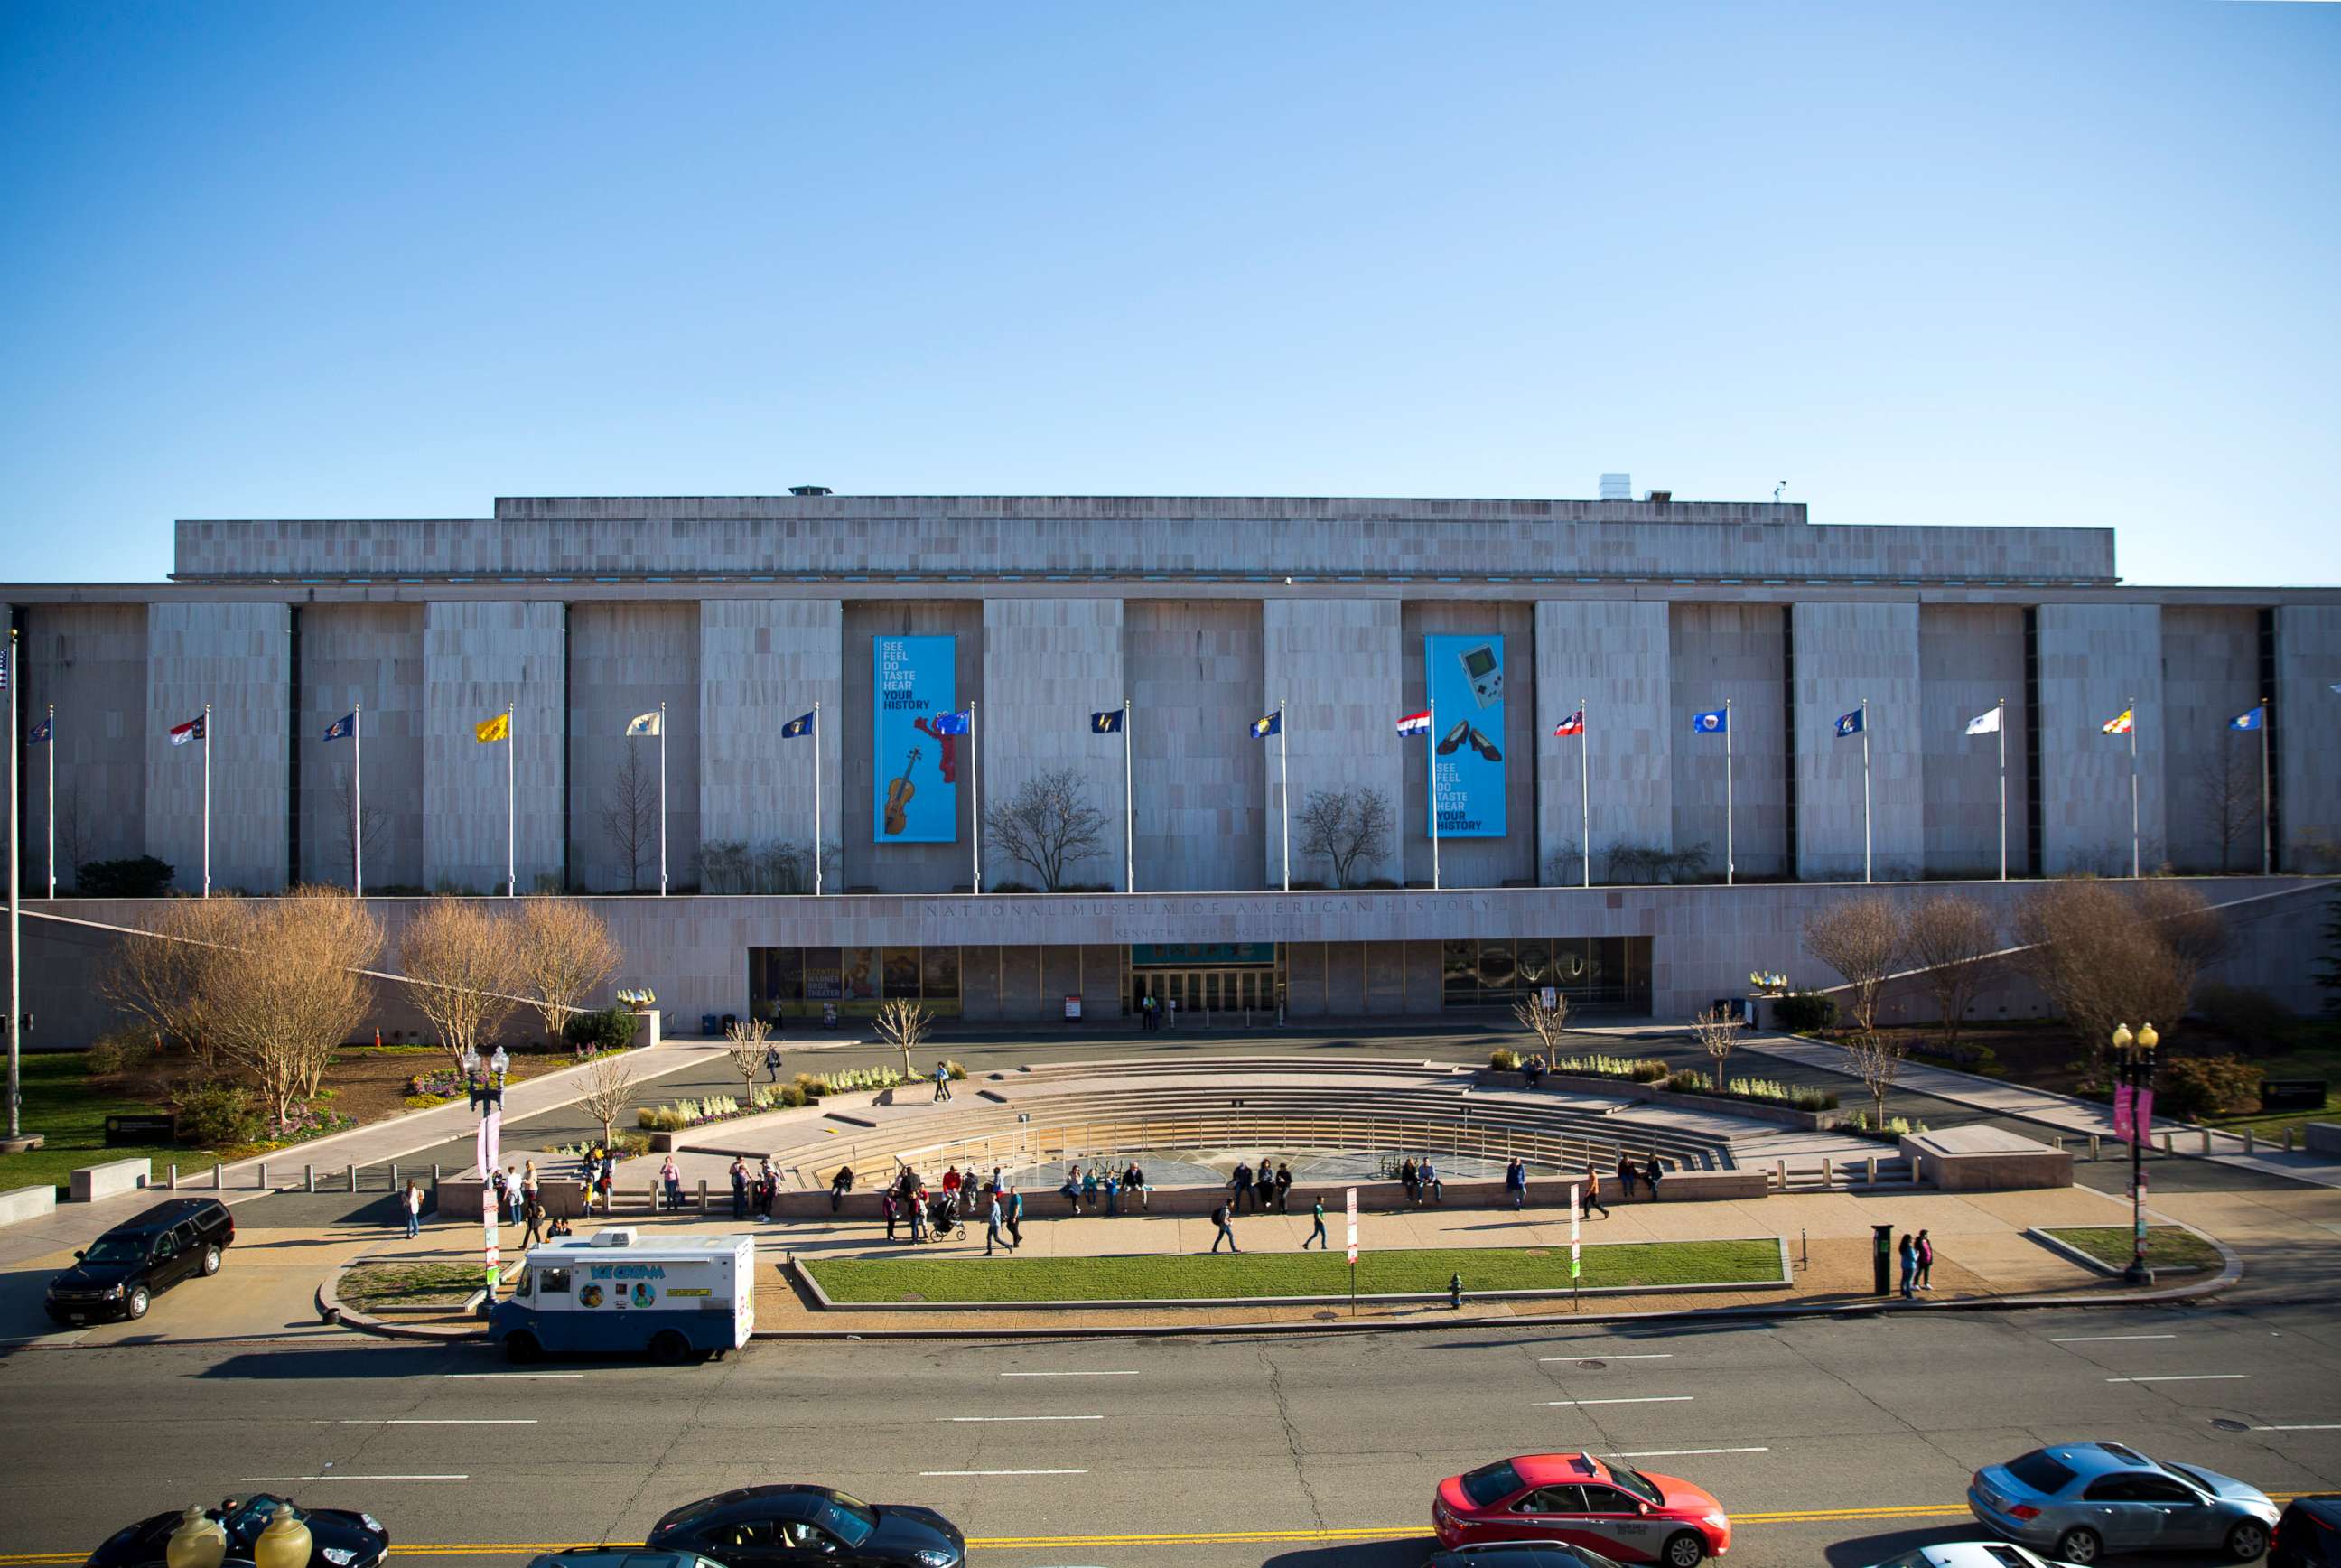 PHOTO: People visit the Smithsonian Institution's National Museum of American History on the National Mall in Washington, D.C., on April 3, 2019.